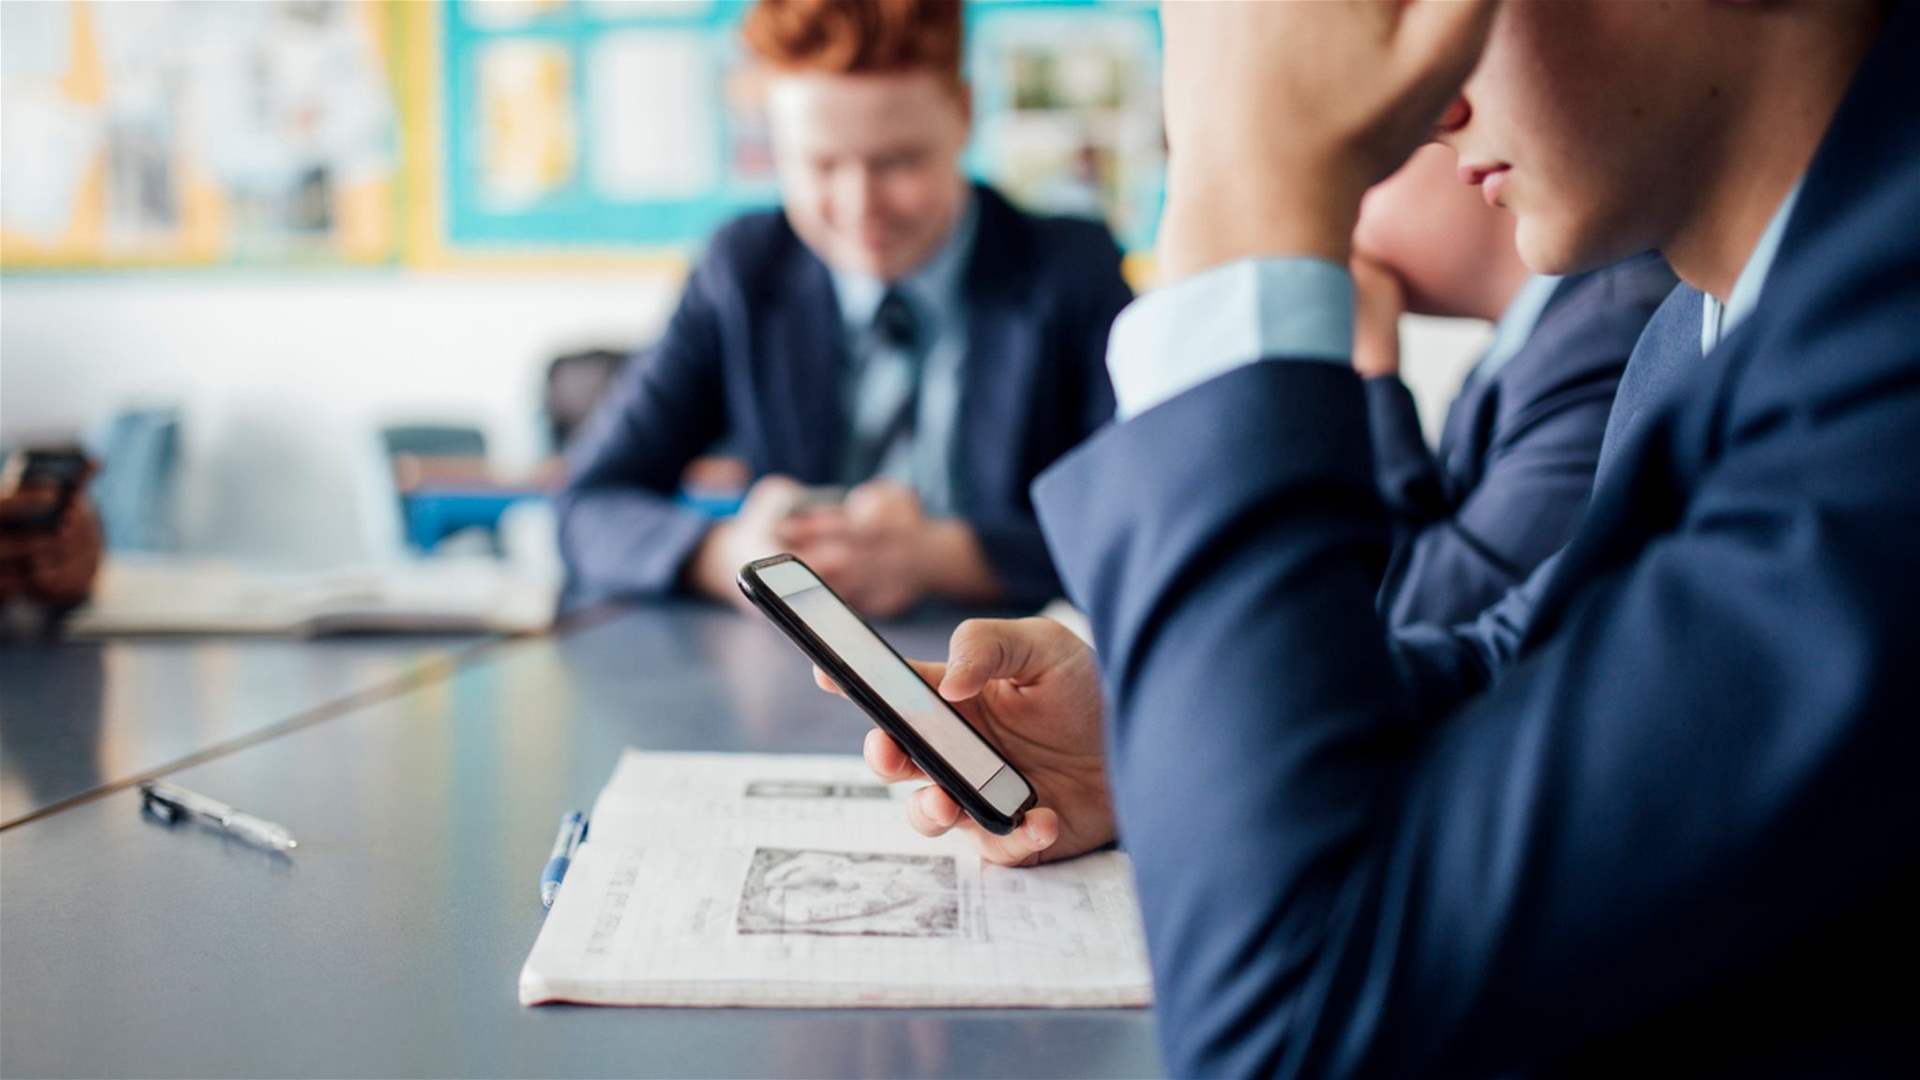 &quot;The Netherlands recommends banning phones and smart watches in school classrooms.&quot;